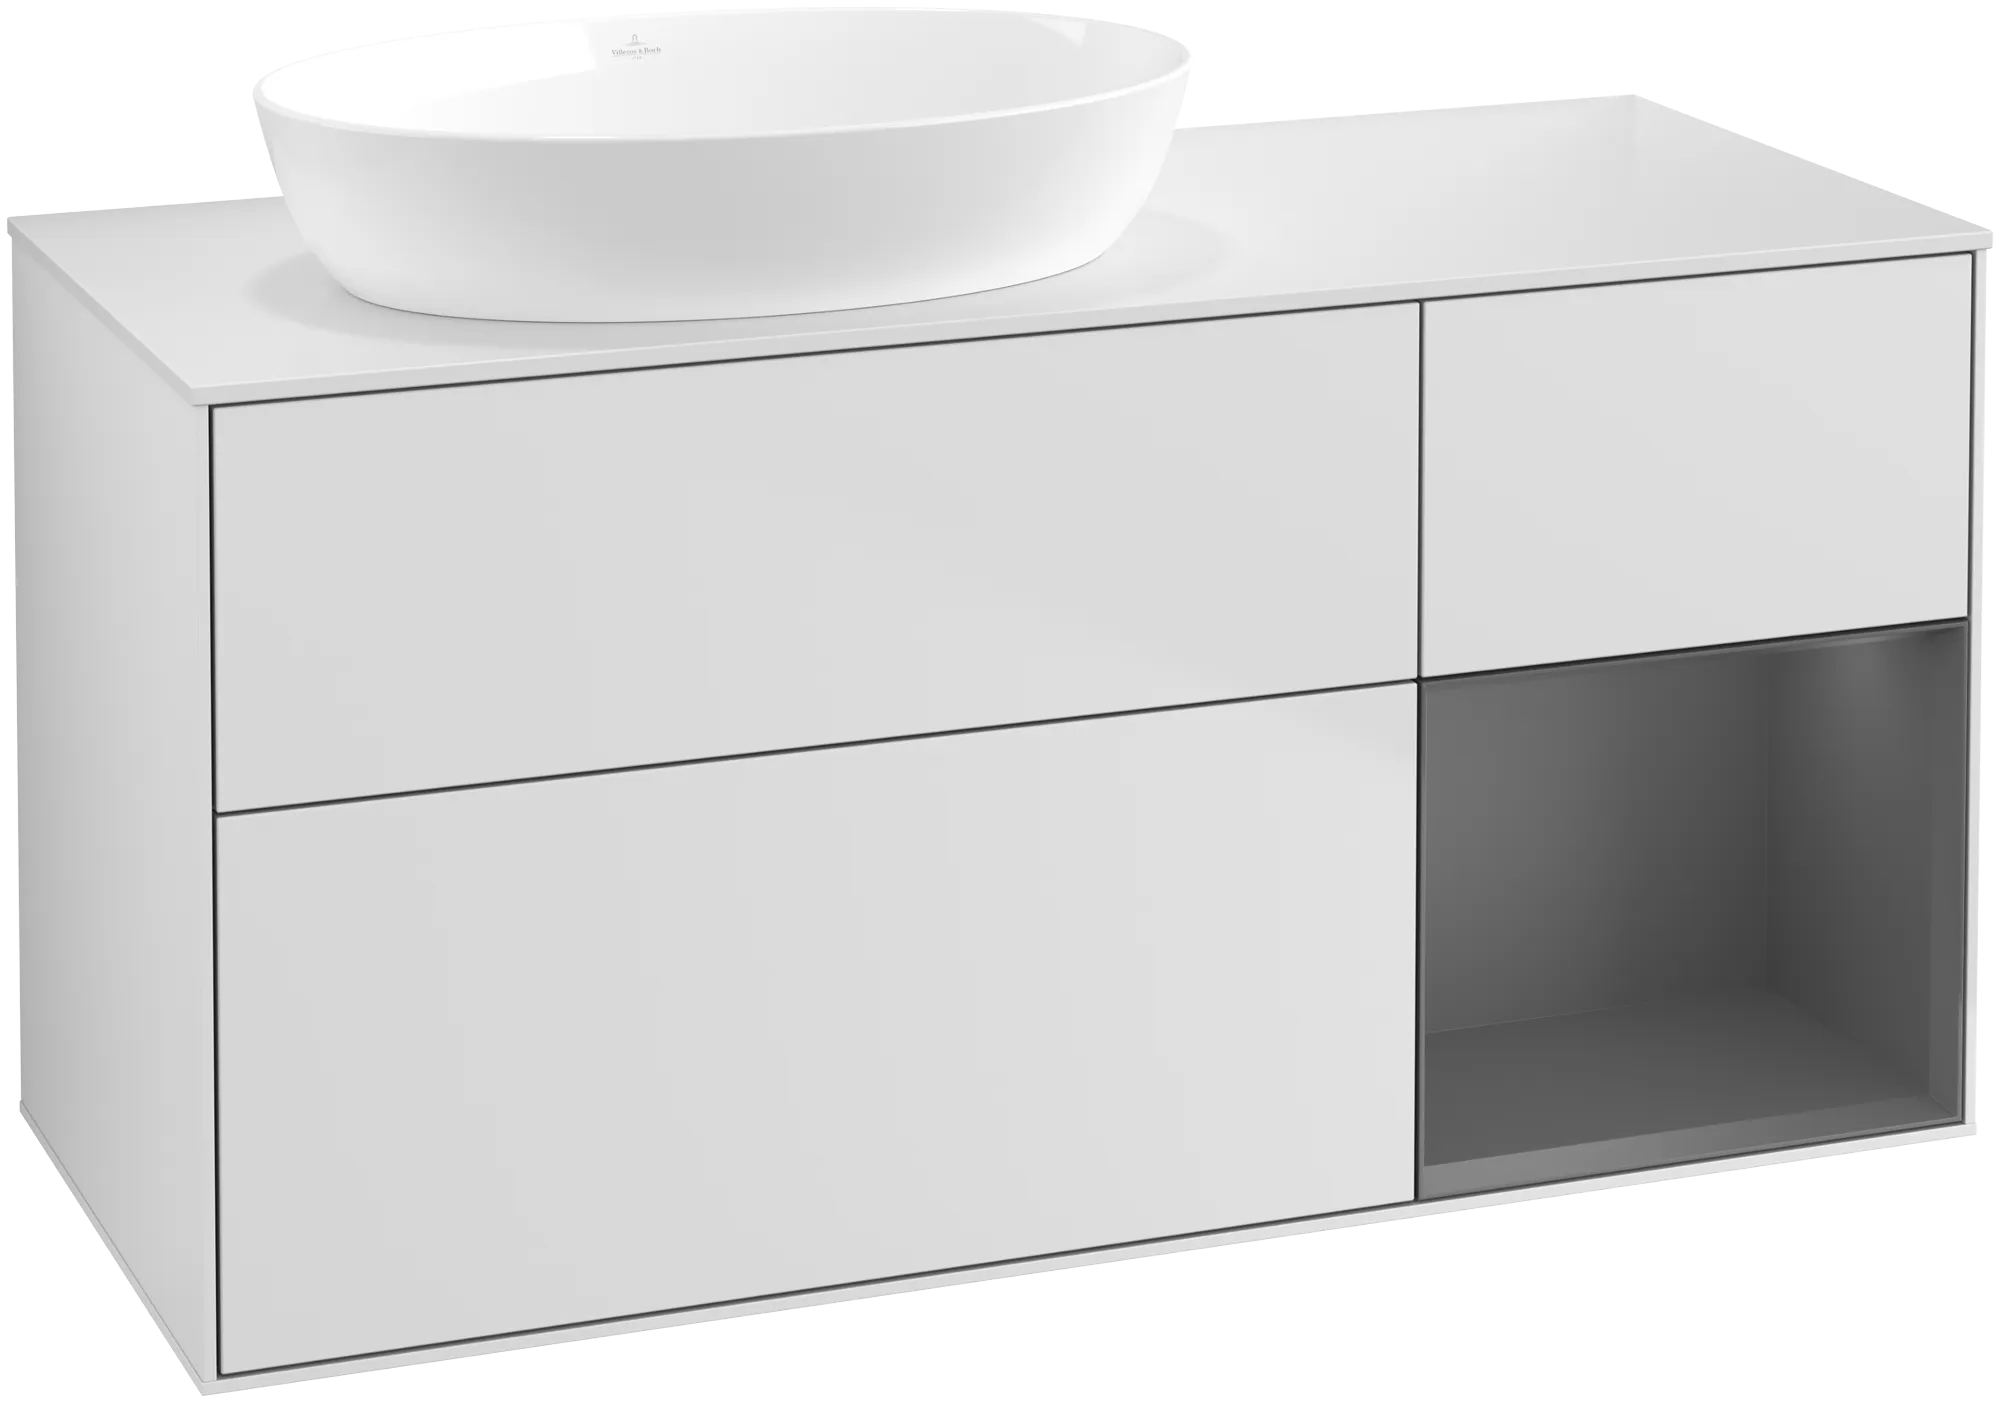 Obrázek VILLEROY BOCH Finion Vanity unit, with lighting, 3 pull-out compartments, 1200 x 603 x 501 mm, White Matt Lacquer / Anthracite Matt Lacquer / Glass White Matt #FA51GKMT